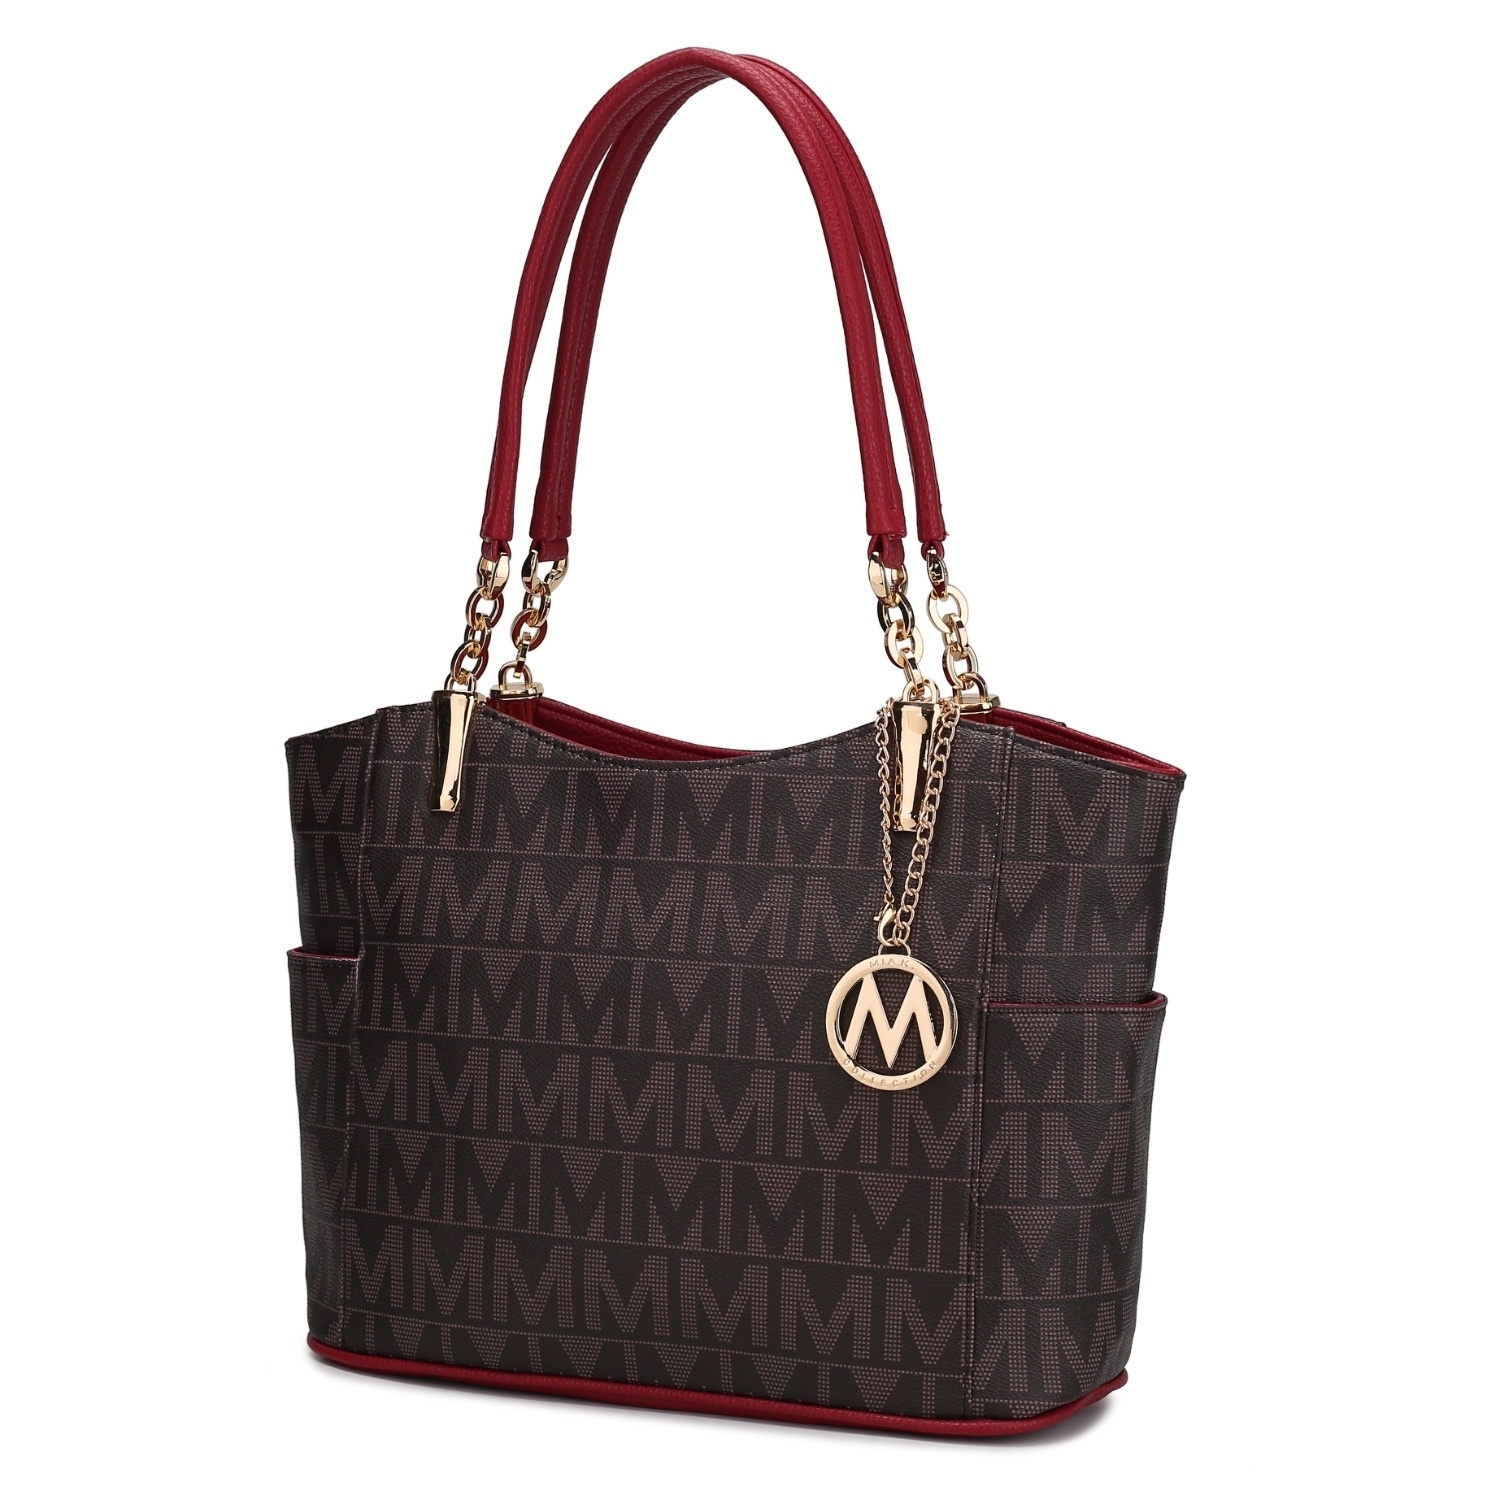 MKF Collection Braylee M Signature Tote Handbag By Mia K. - Red